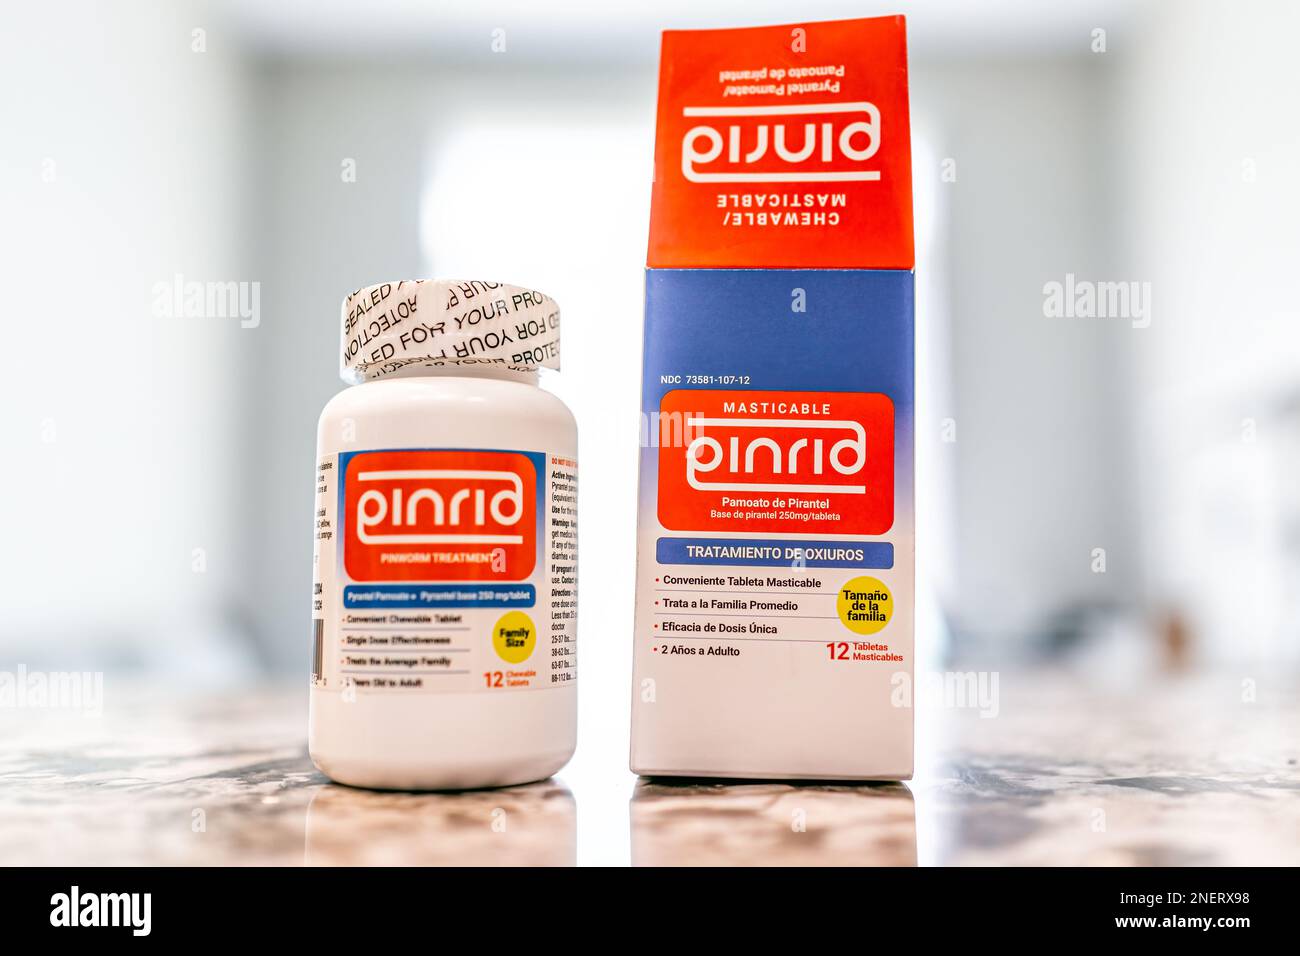 Avon, USA - June 17, 2022: Closeup of pinrid brand of over the counter pinworm treatment medication with sign label in spanish Stock Photo